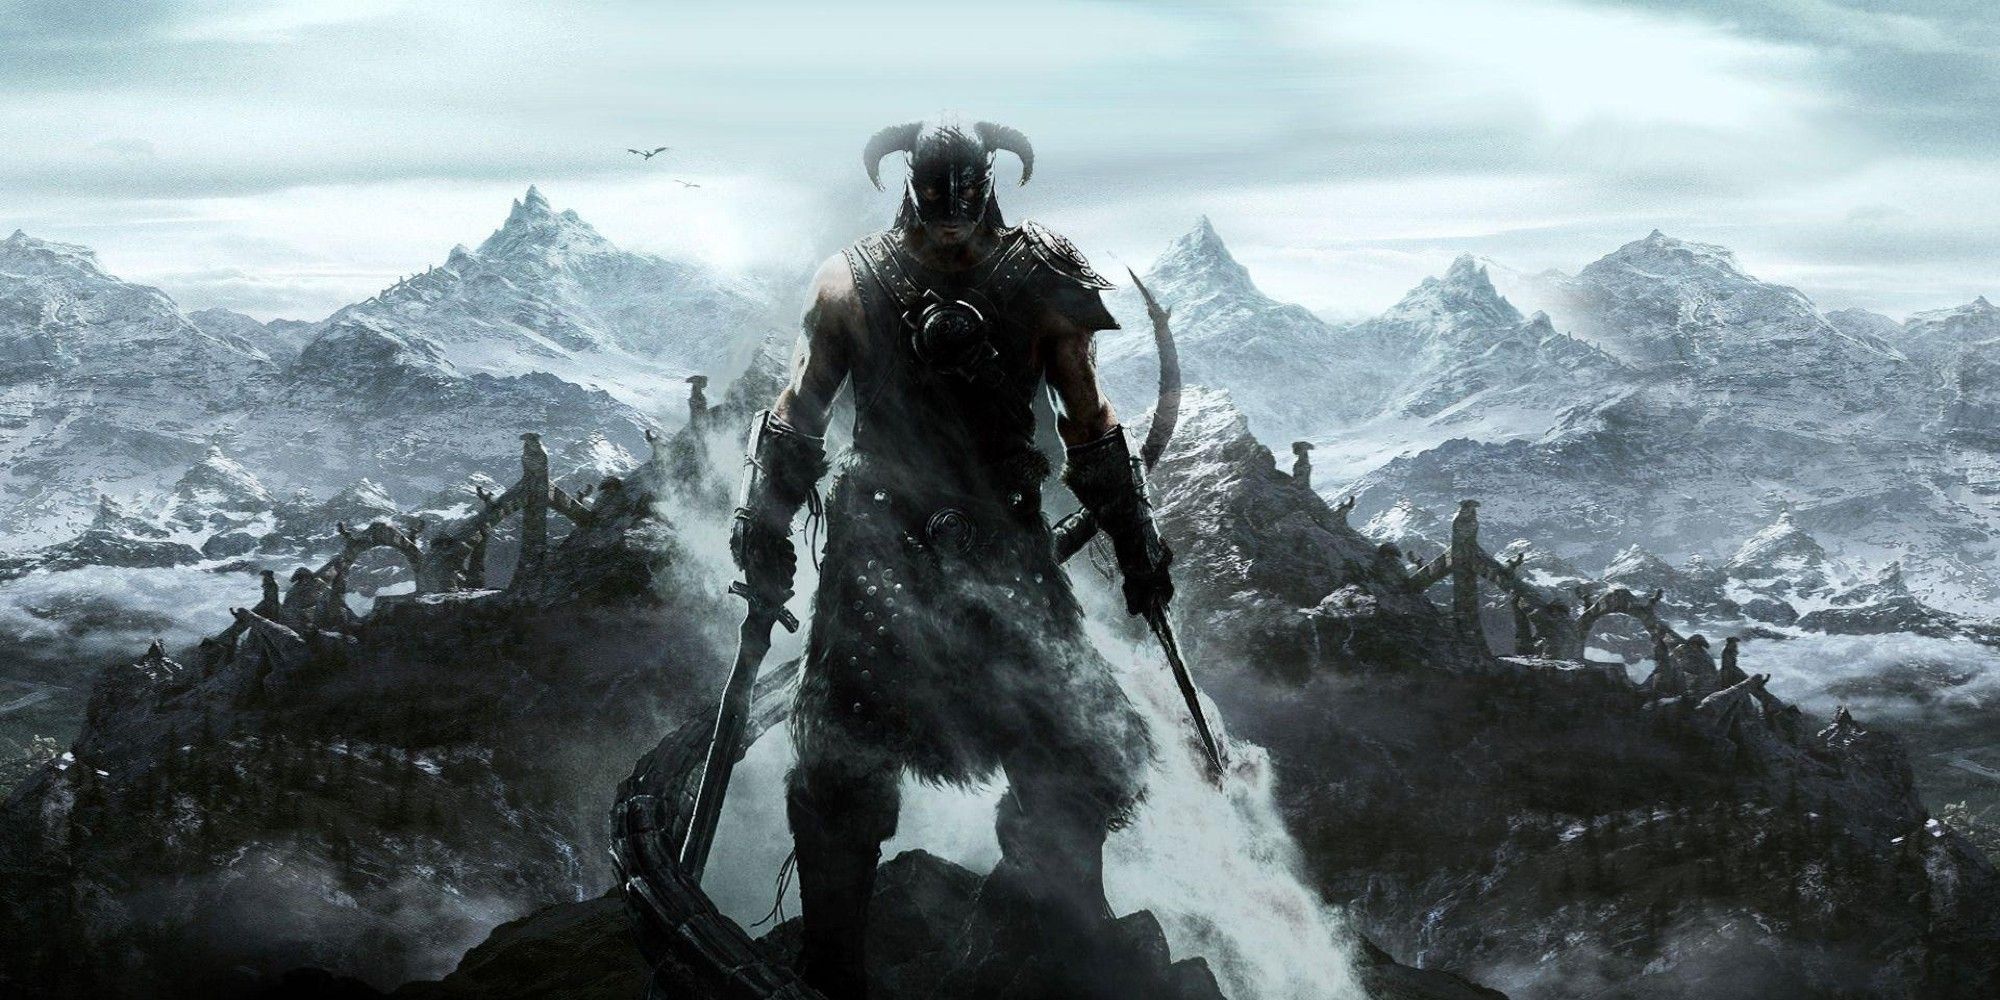 The Elder Scrolls V: Skyrim official art with the Dovahkiin looking at the camera with mountains in the background